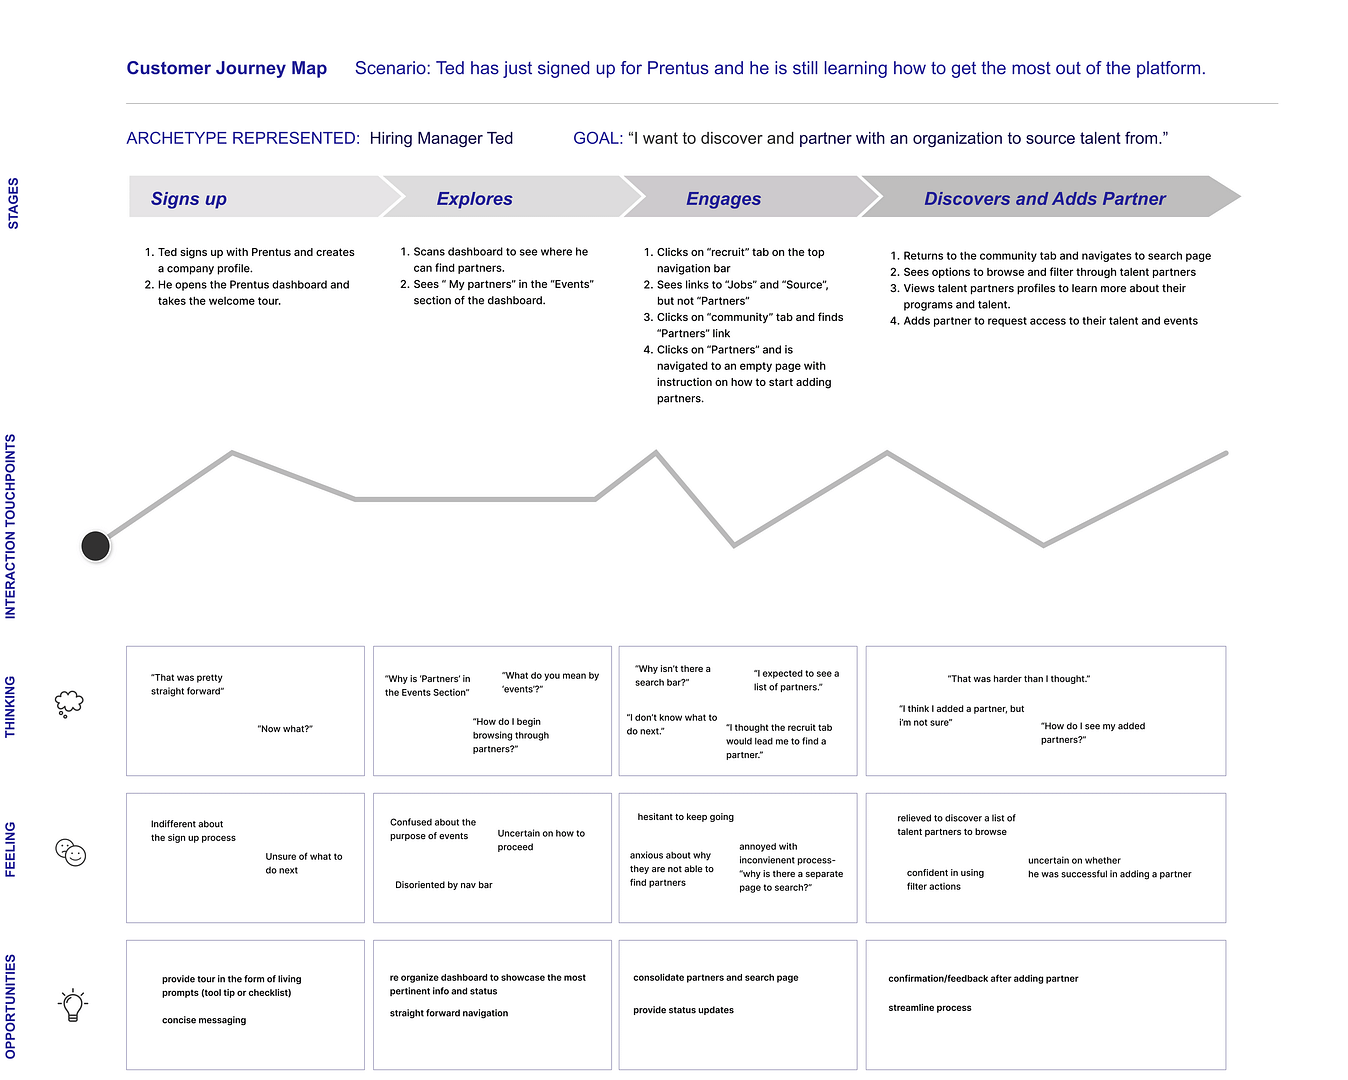 Customer journey map analysis of four customer stages onboarding onto the Prentus system, documenting the user's level of interaction, thoughts, feelings, and opportunities.